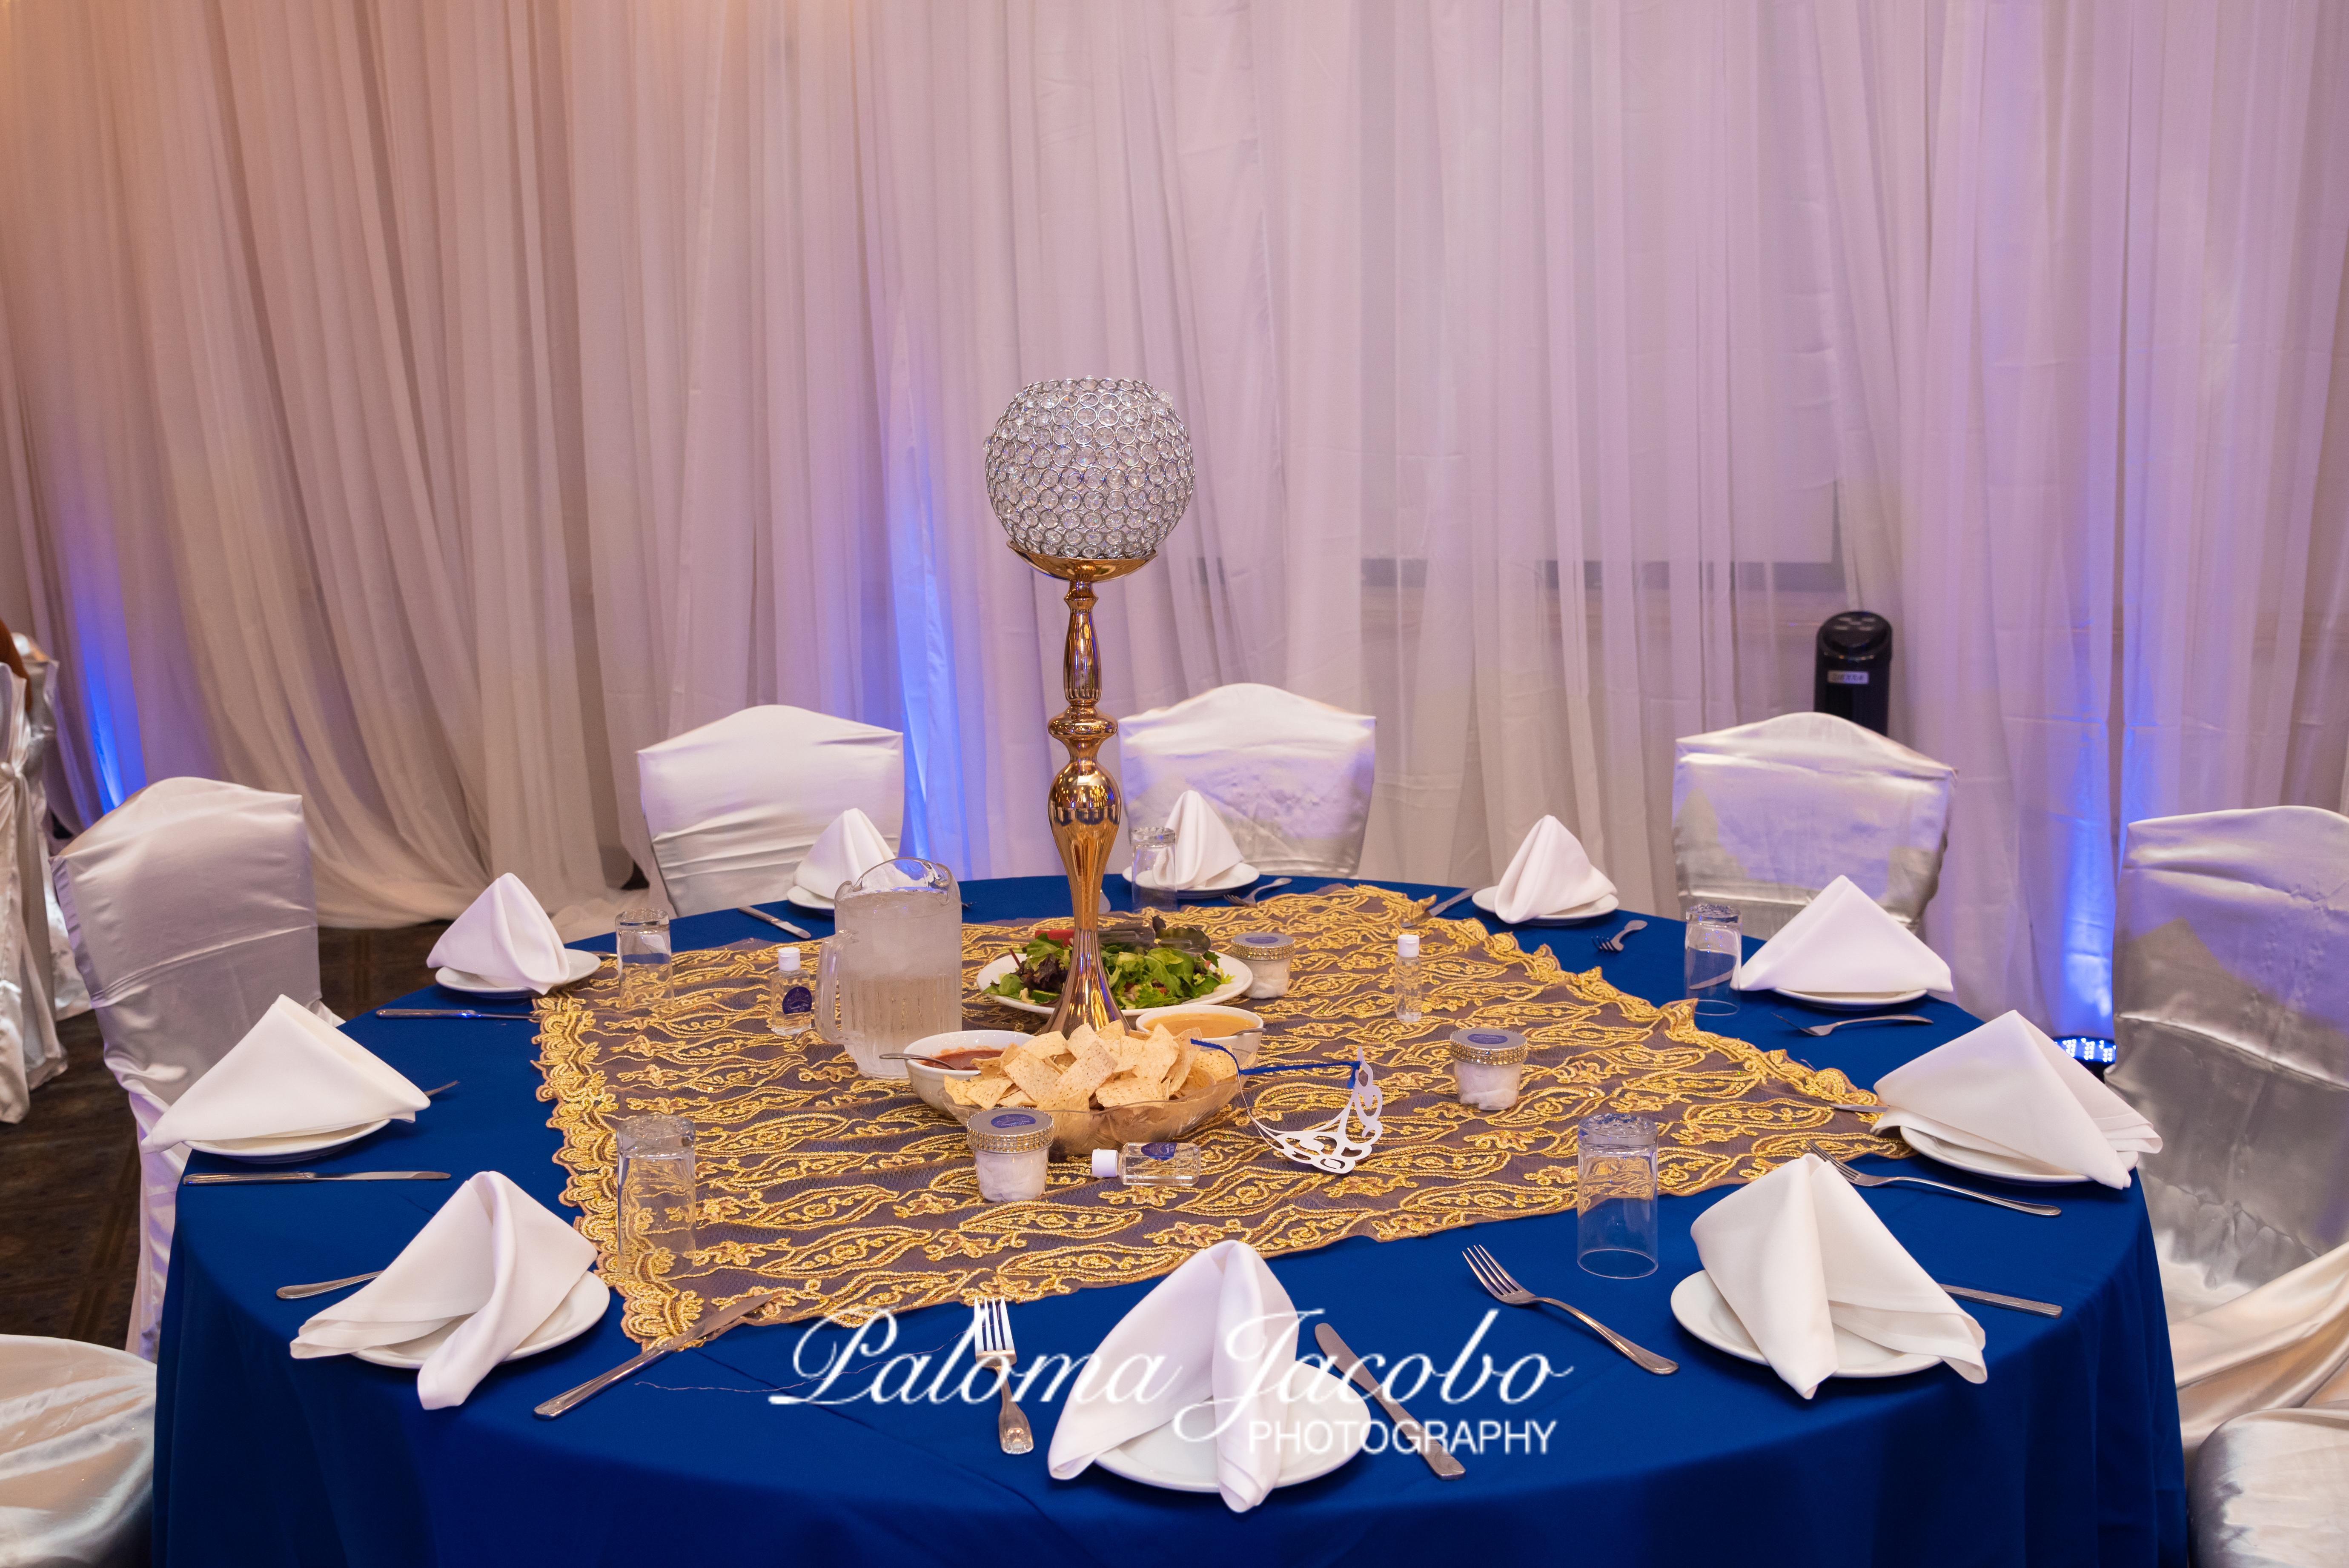 Royal blue and golden decorations for Quinceanera party by Paloma Jacobo Photography 